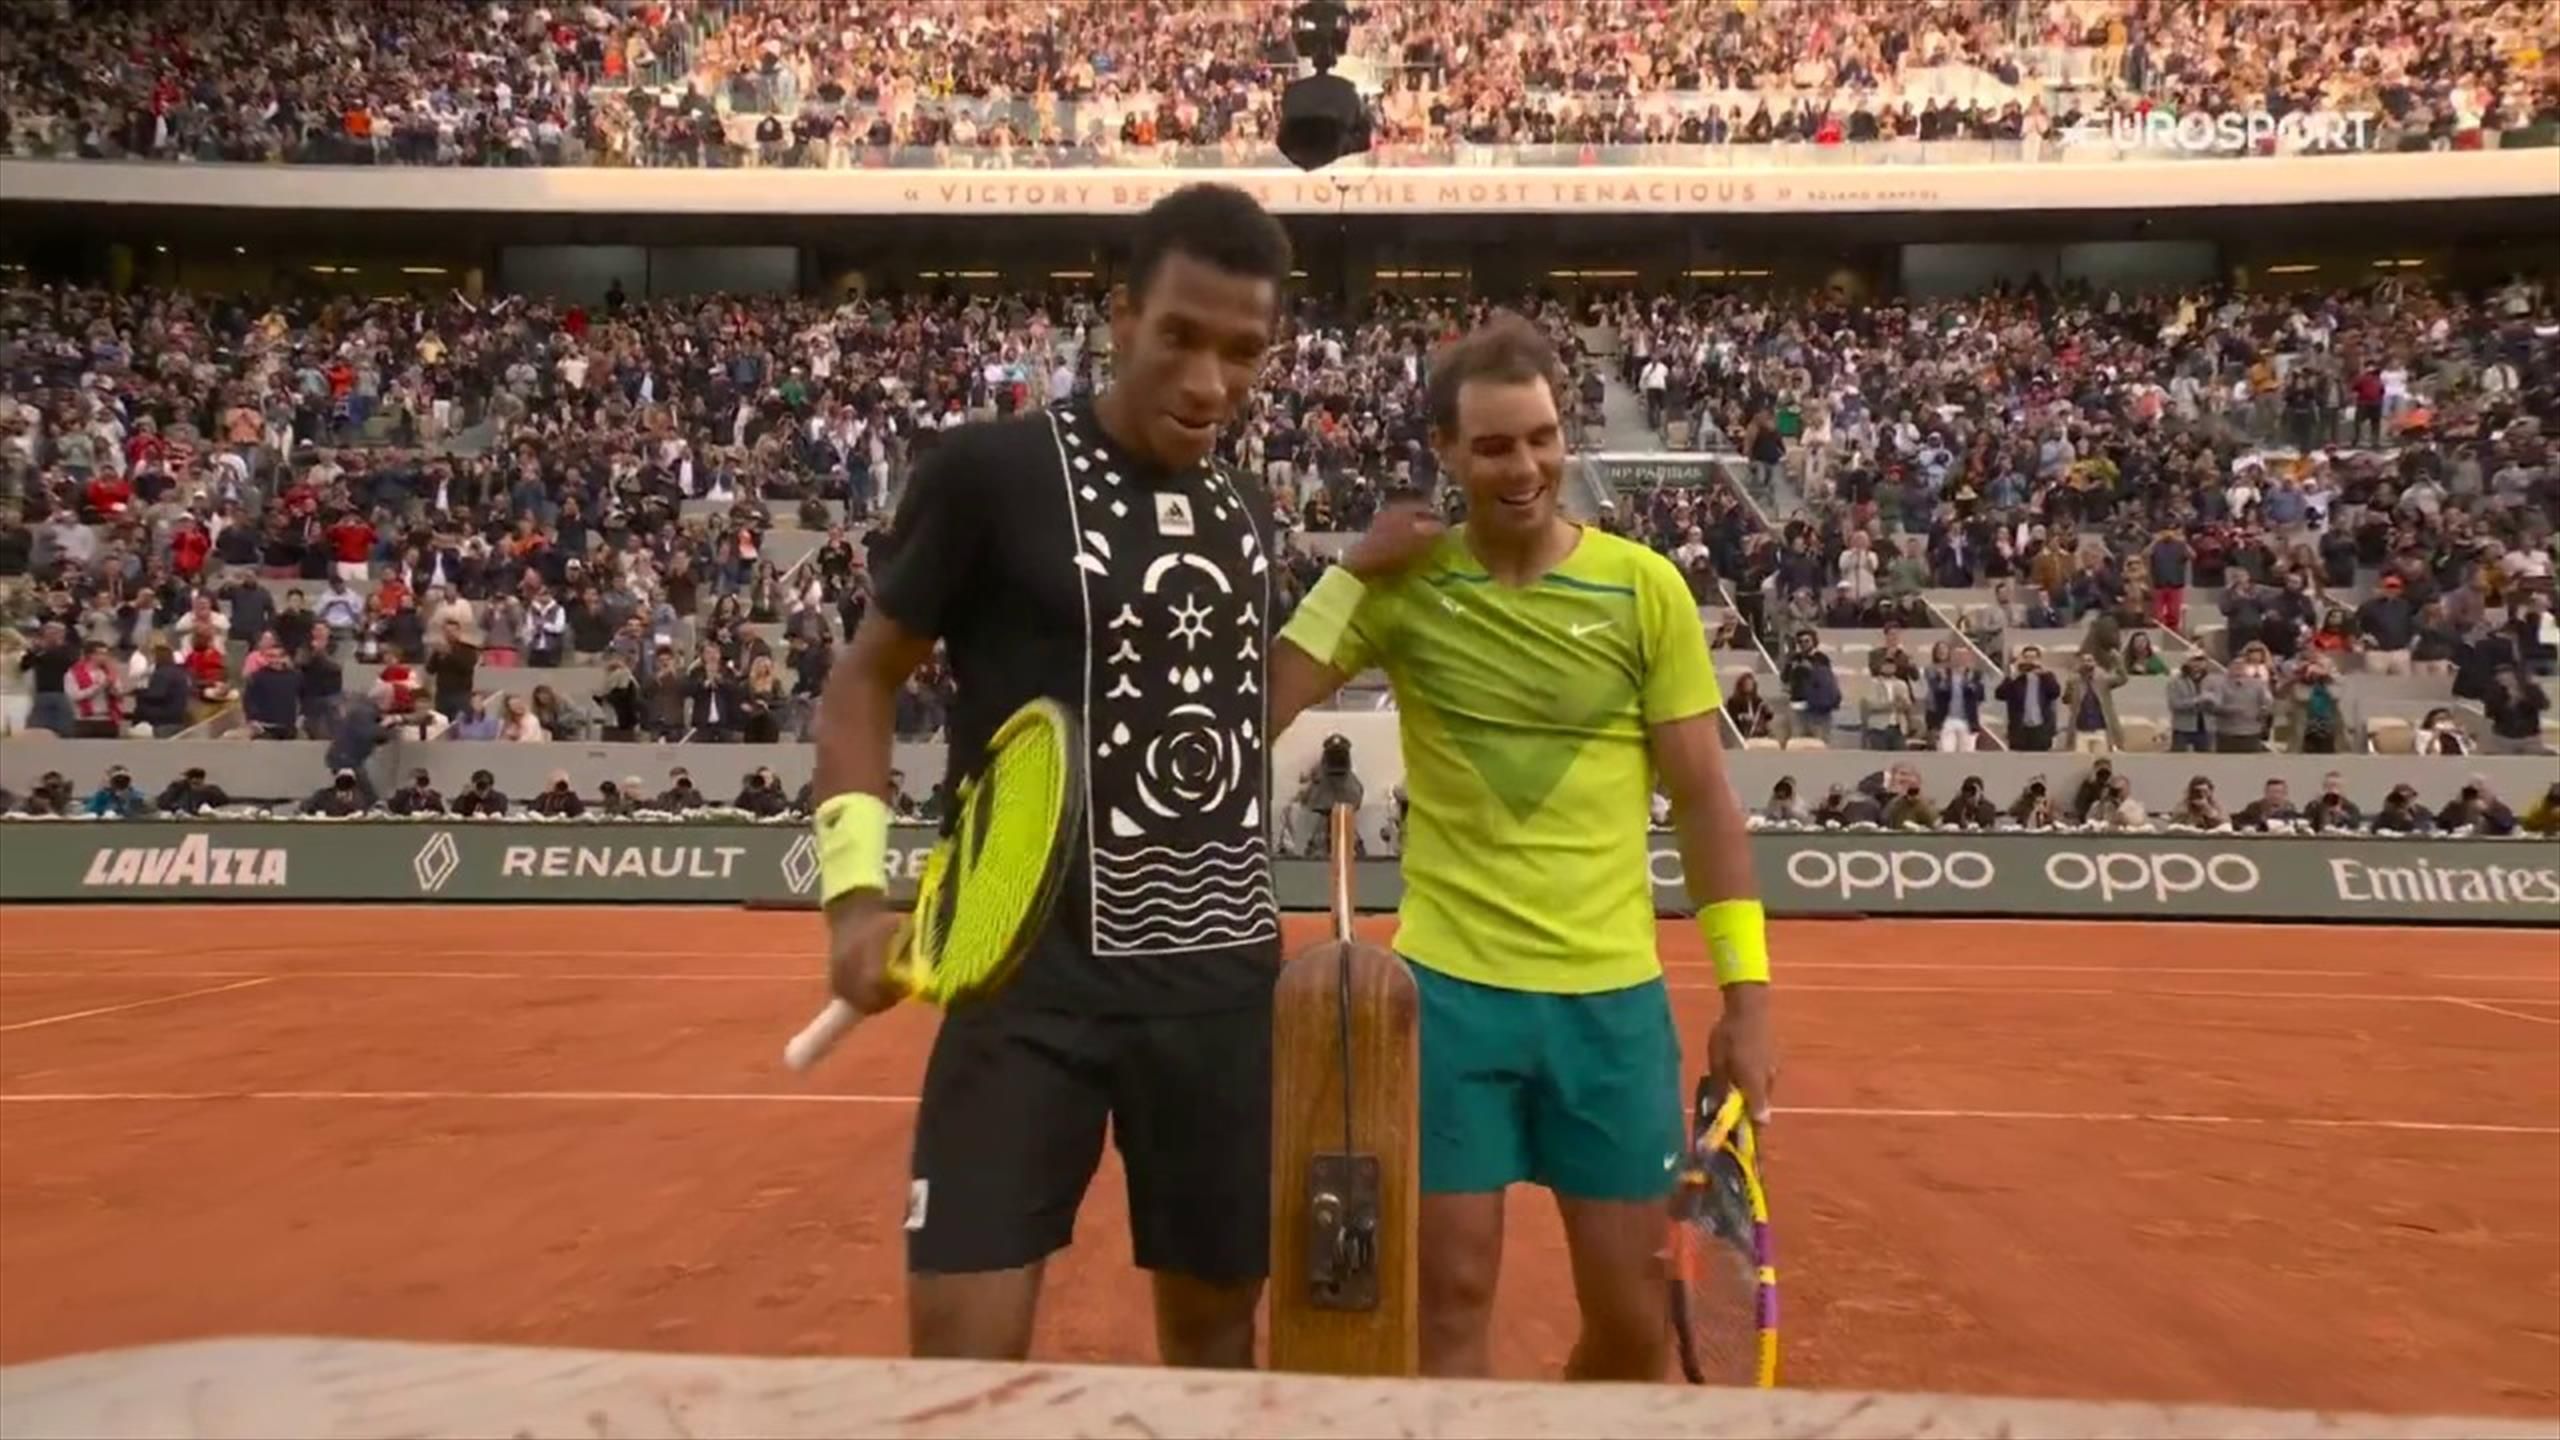 Extraordinary! - Rafael Nadal clinches famous victory over Felix Auger- Aliassime at French Open - Tennis video